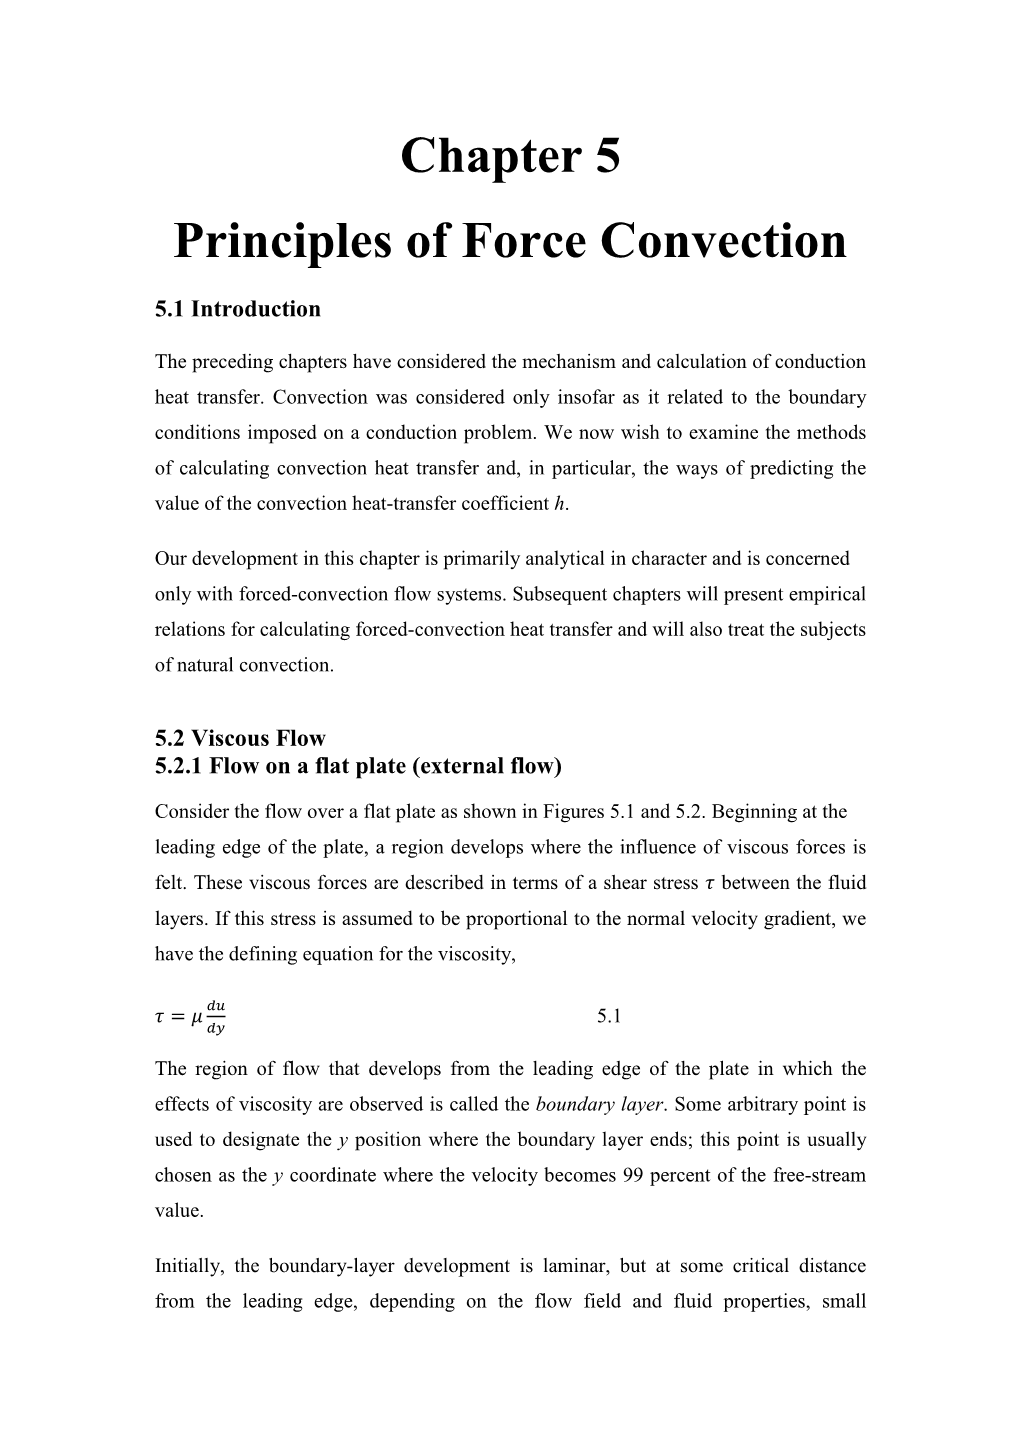 Chapter 5 Principles of Force Convection